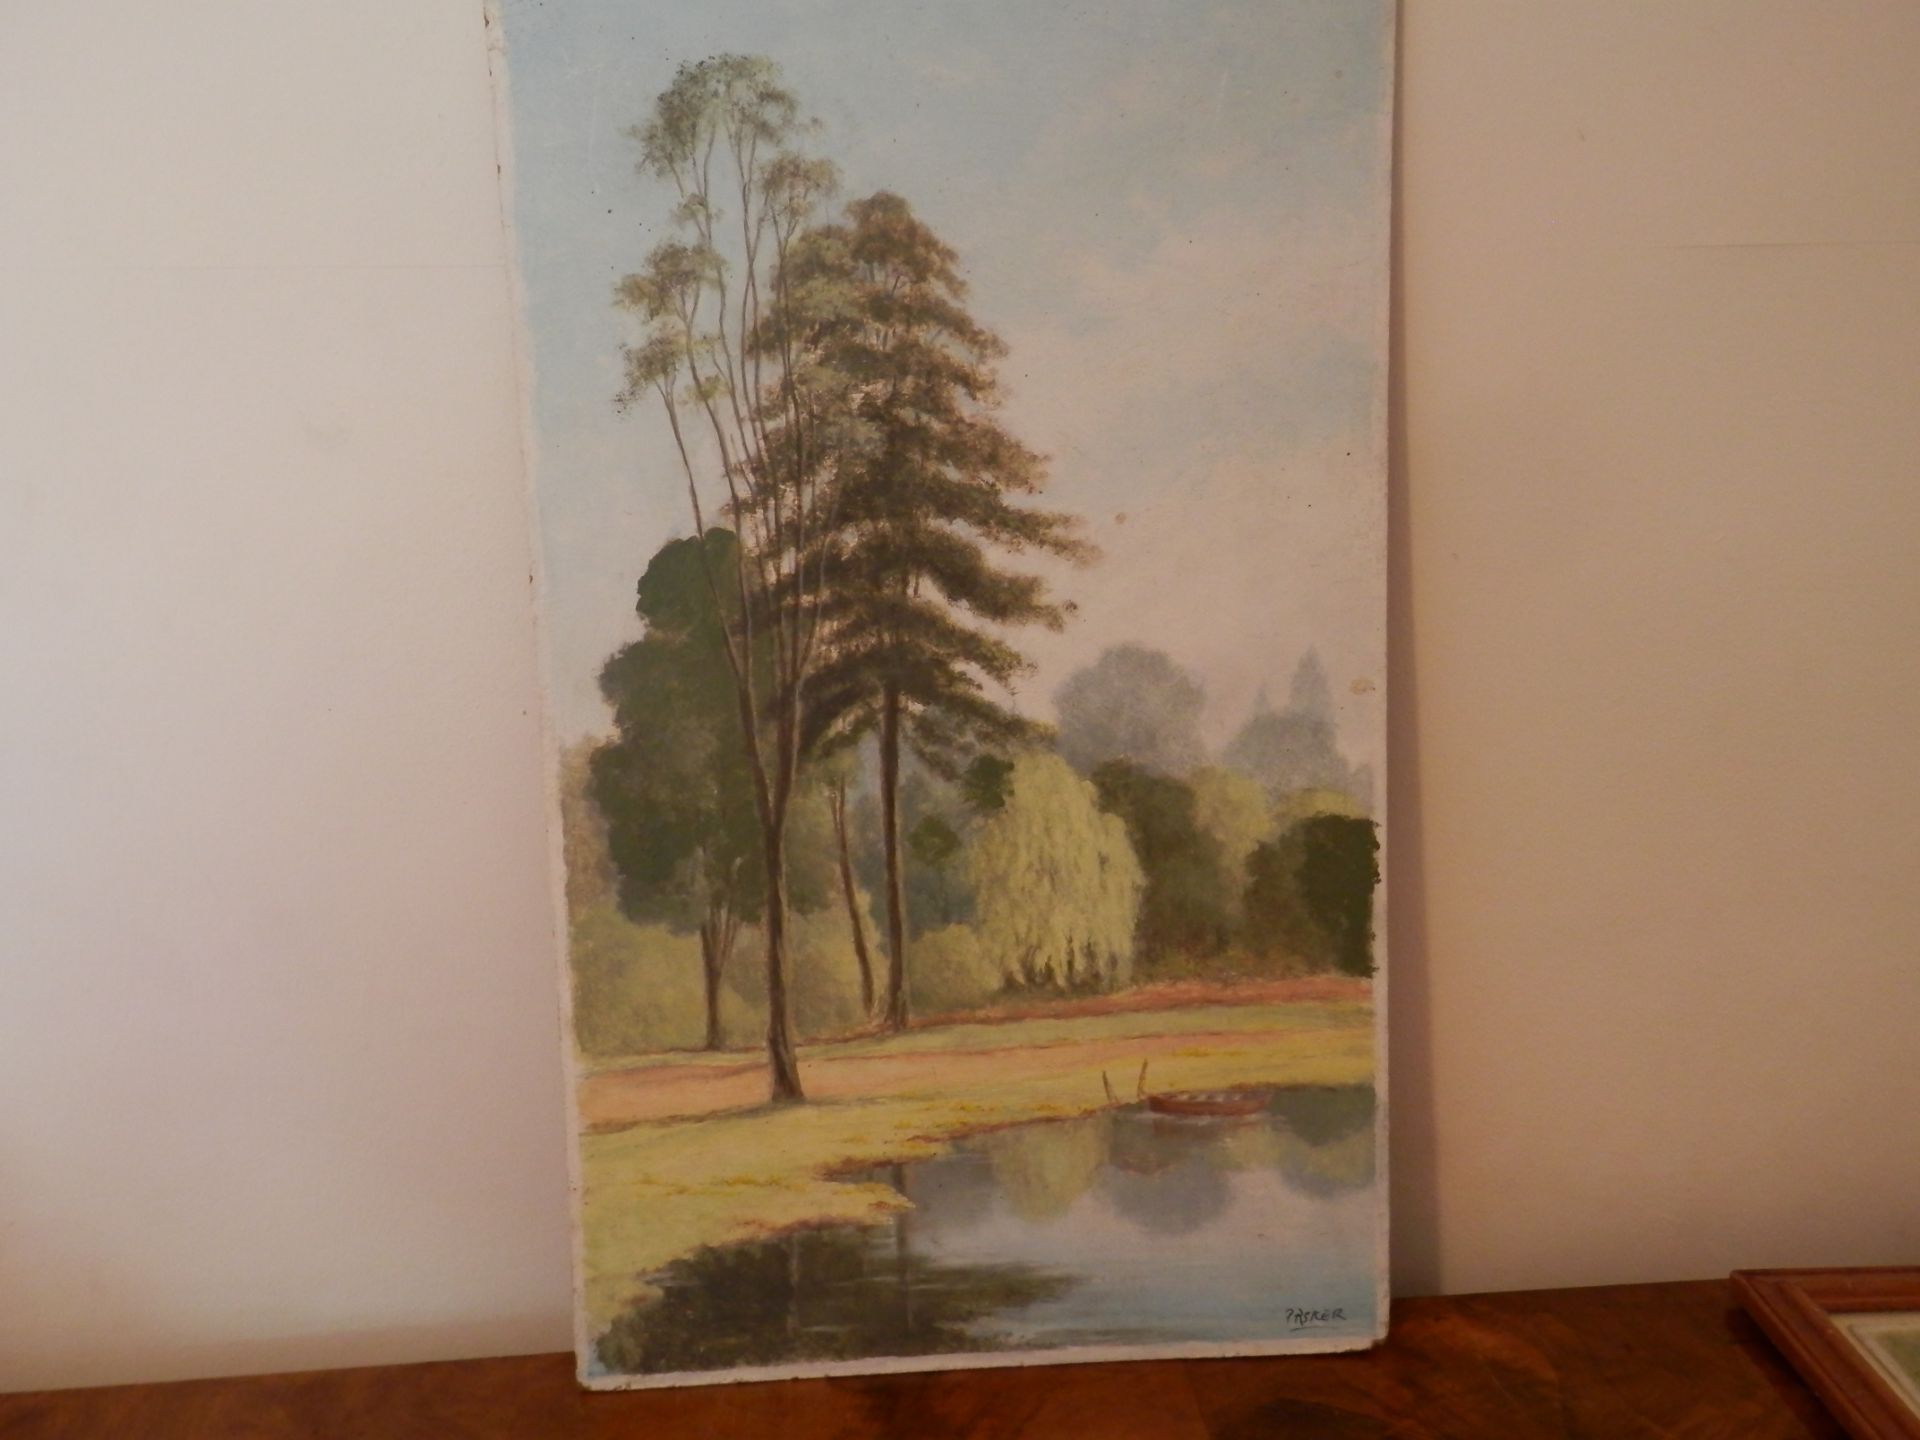 2 x LOVELY VINTAGE WATER COLOUR PAINTINGS BY "PASKER", ONE FRAMED. - Image 5 of 8